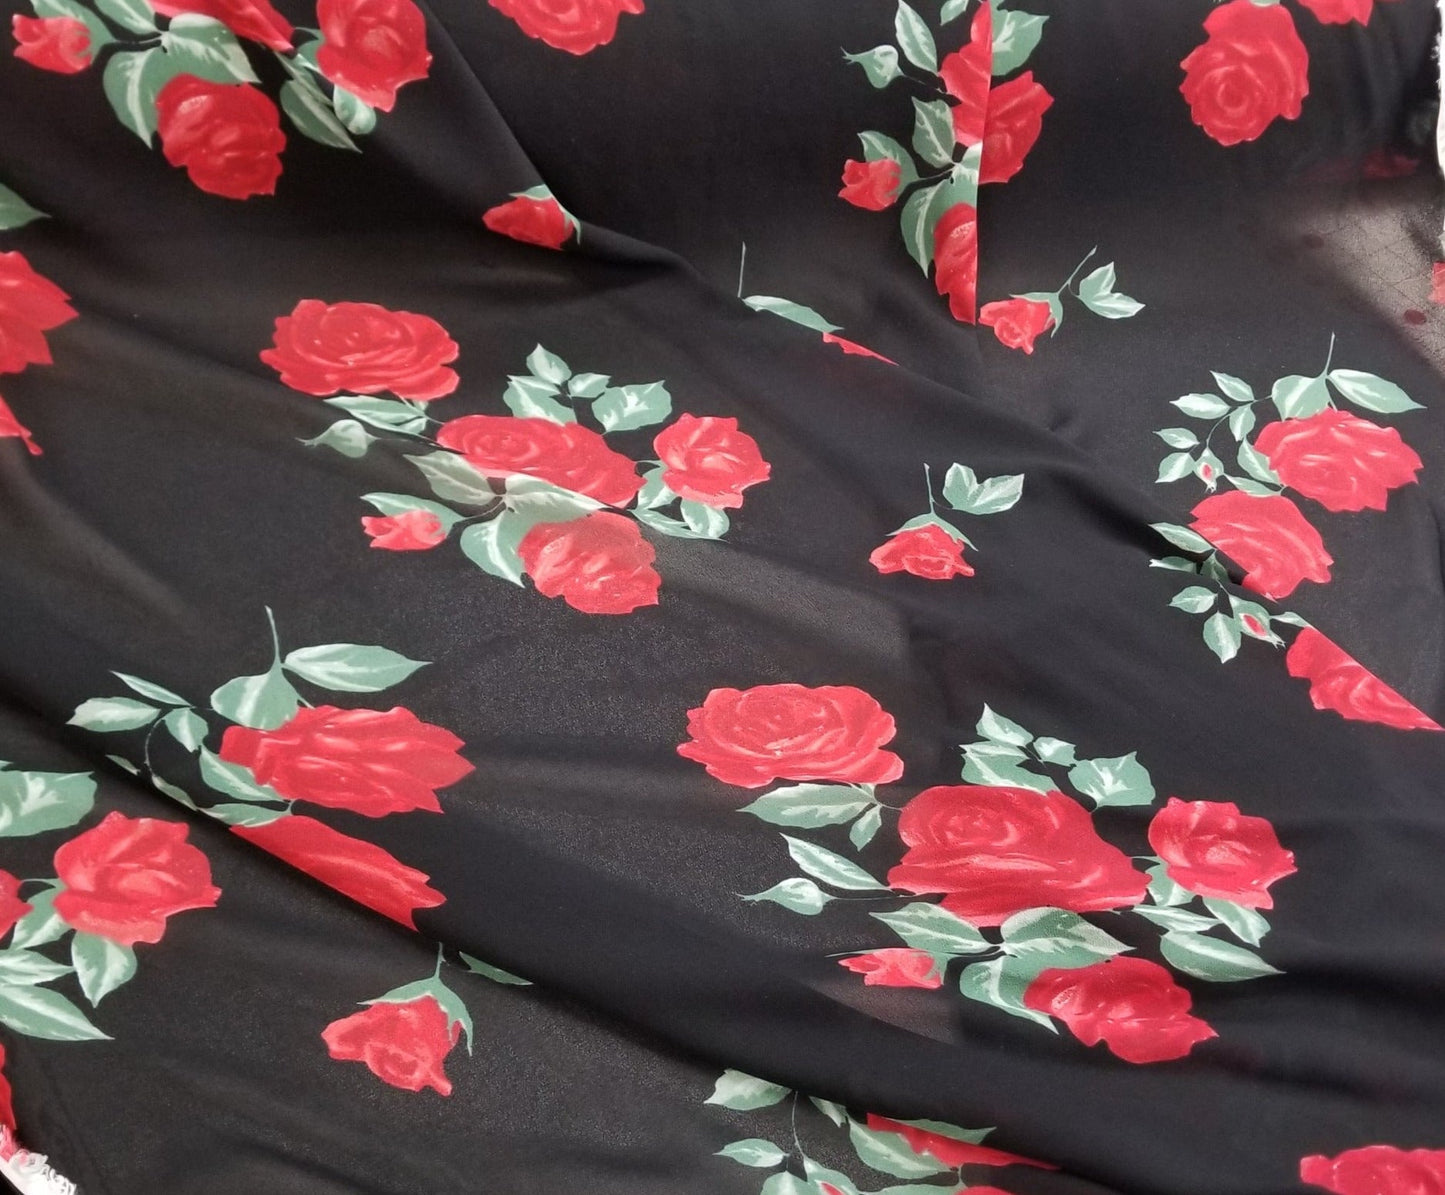 Designer Deadstock Blousewear Rayon Georgette Sheer Crepe Rosalie Roses Woven- Sold by the yard